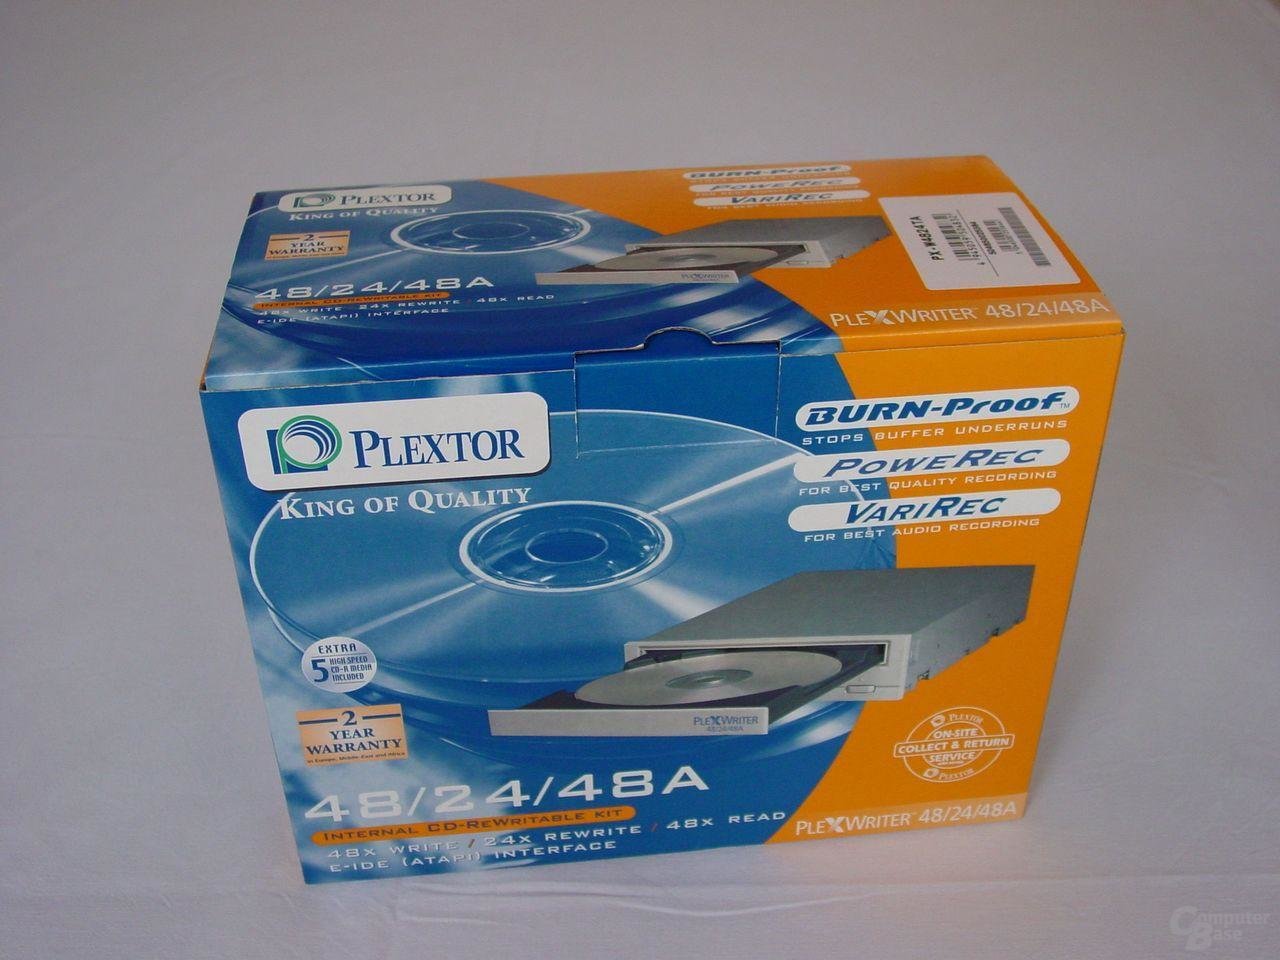 Verpackung PX-4824TA